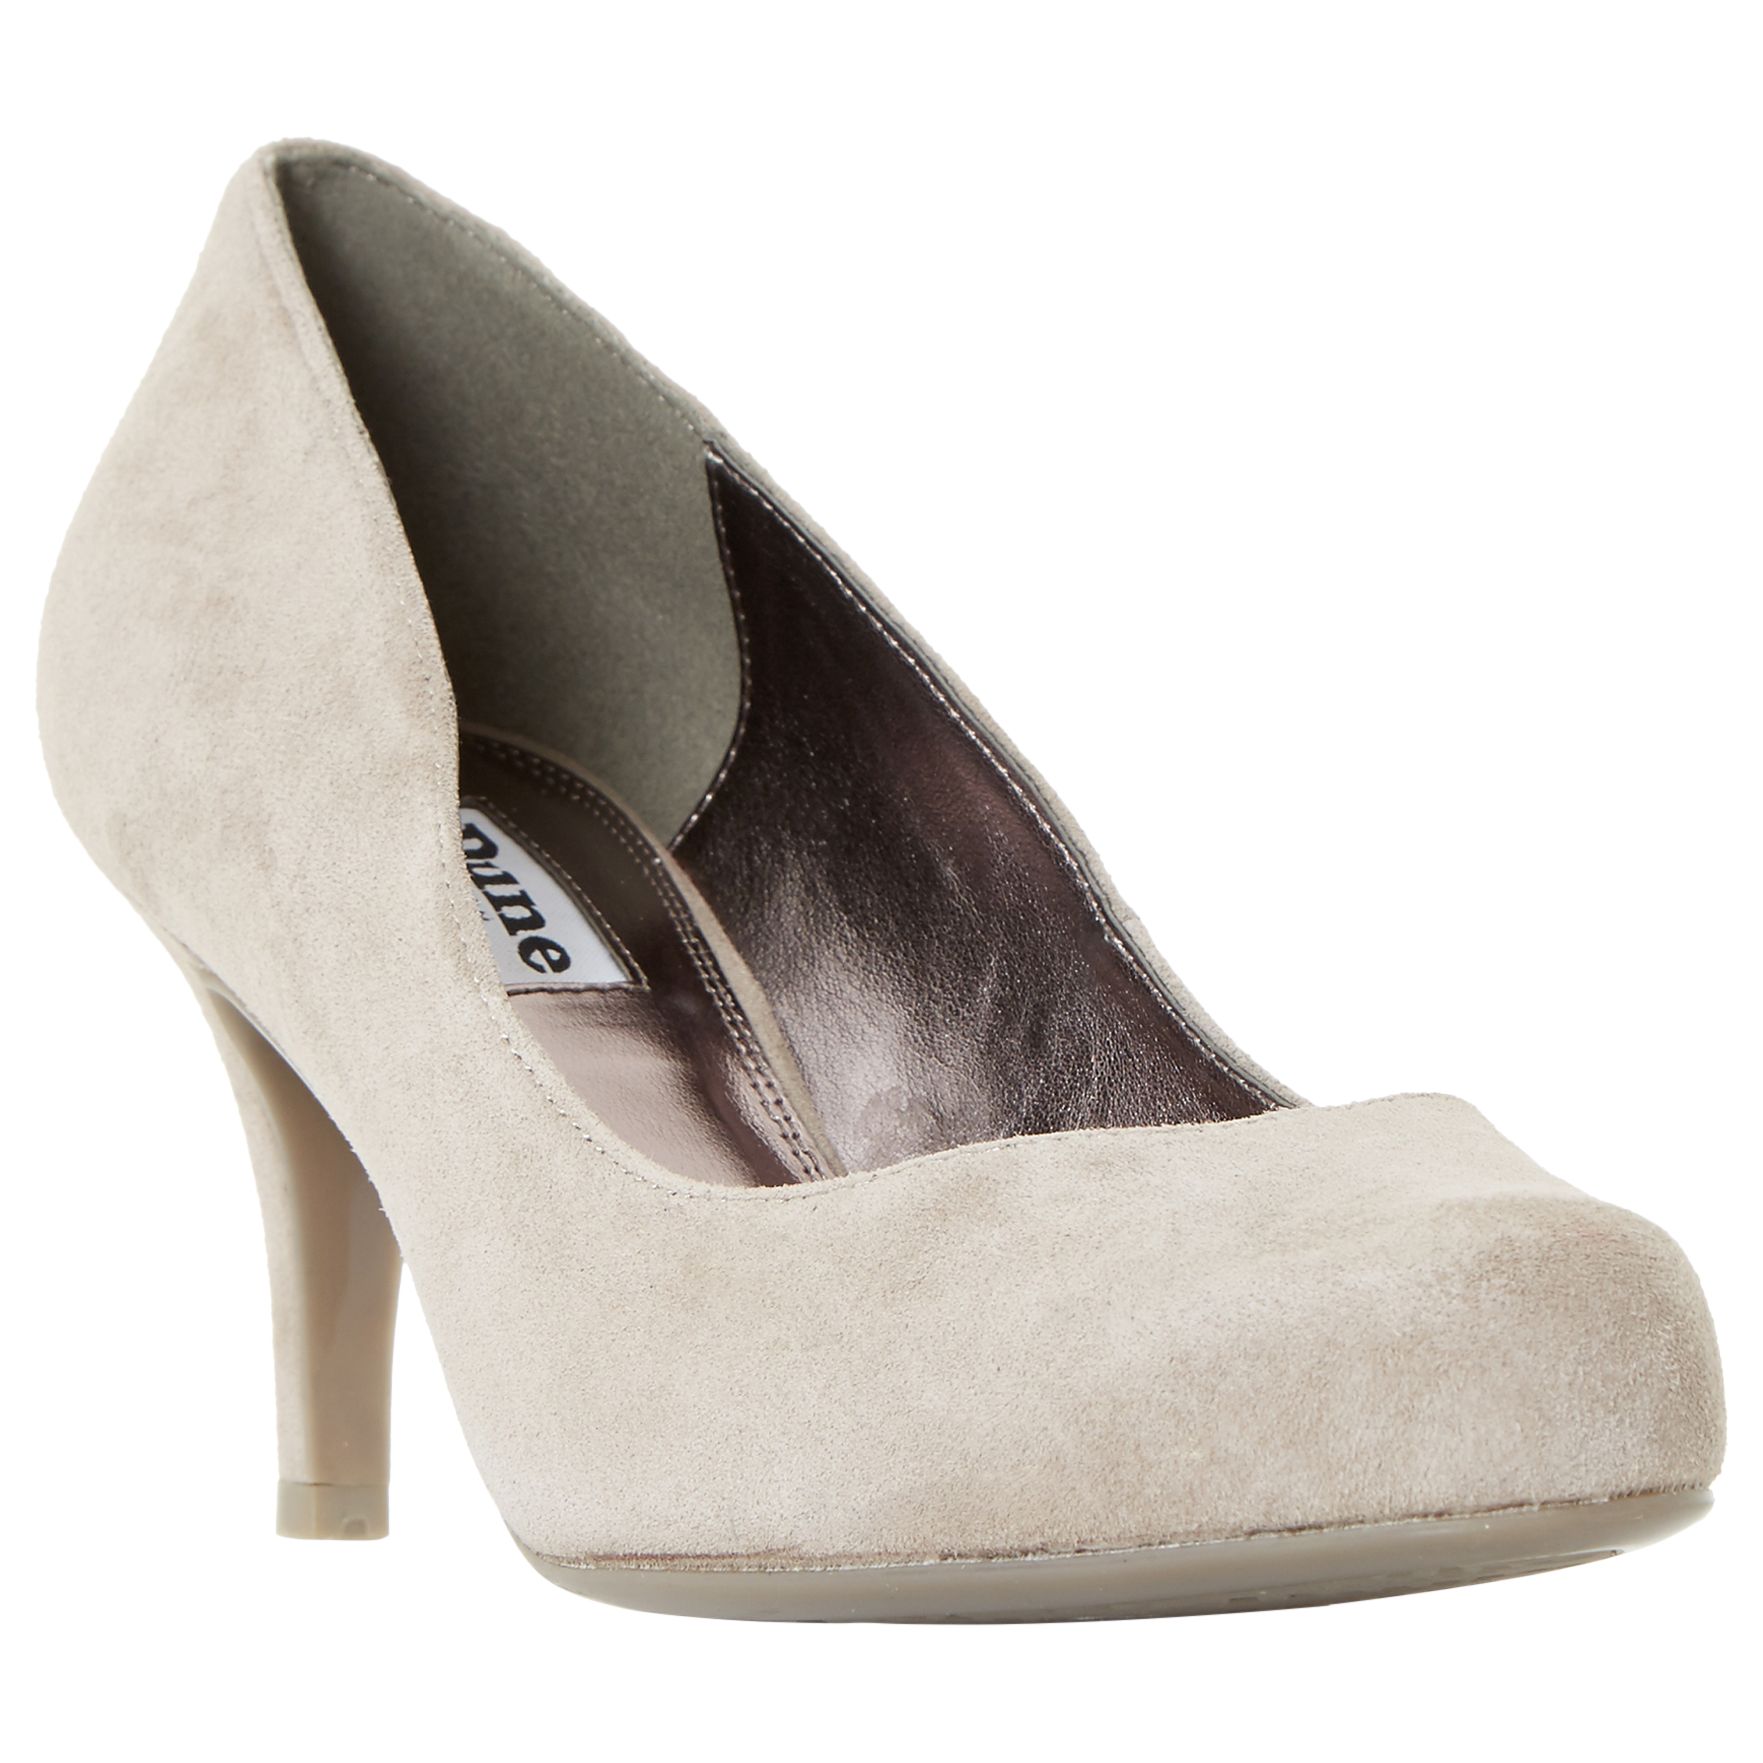 Dune Amelia Stiletto Heeled Court Shoes, Taupe Suede, 8